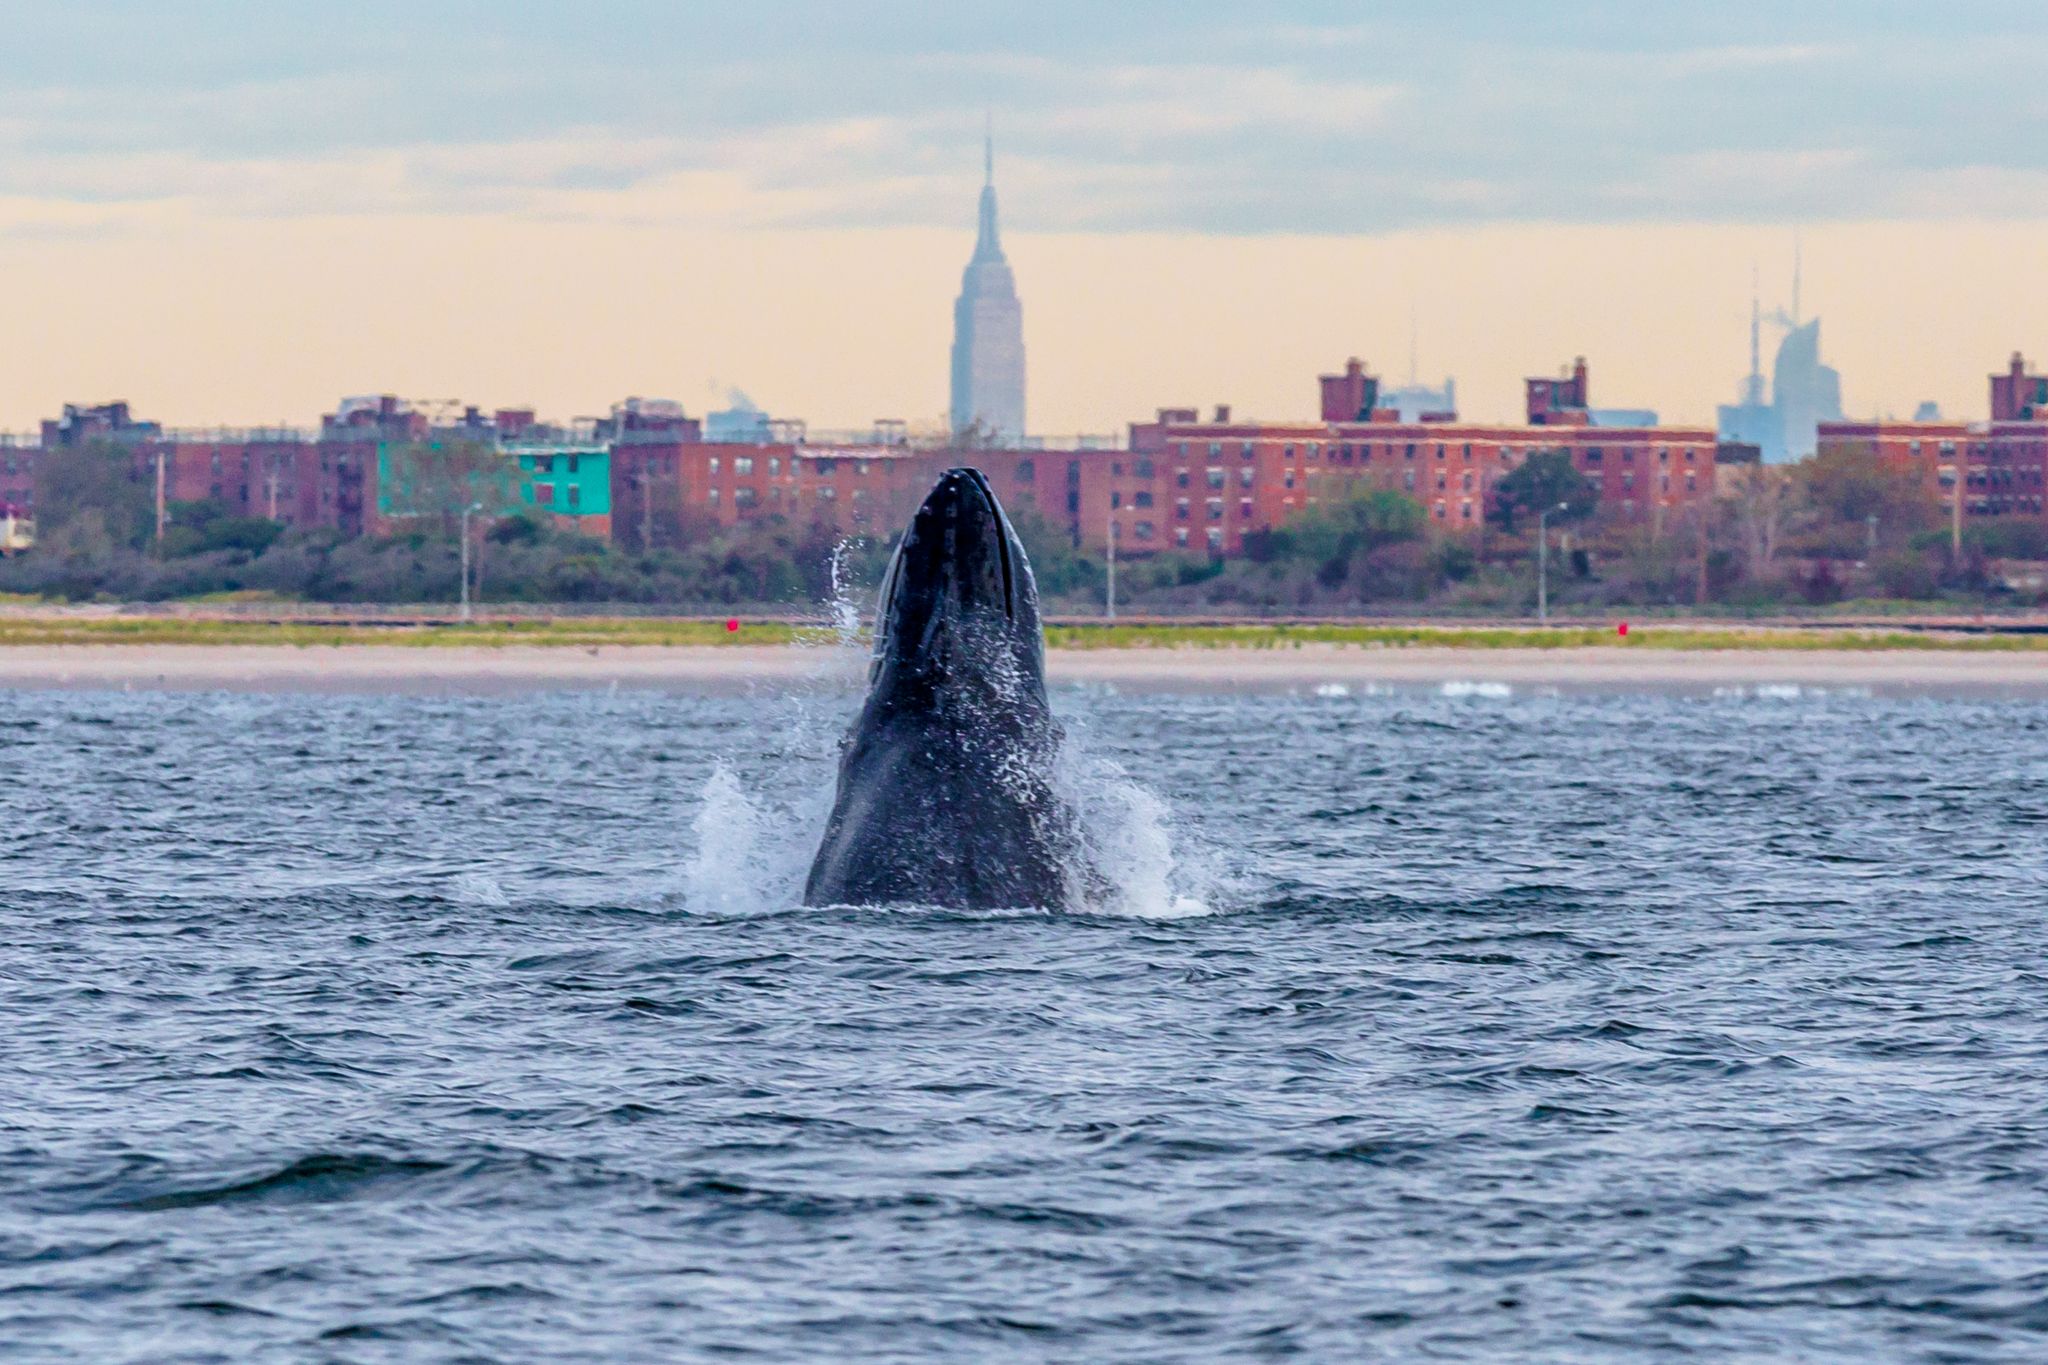 Large numbers of humpback whales have returned to NYC for the first time in a century ...